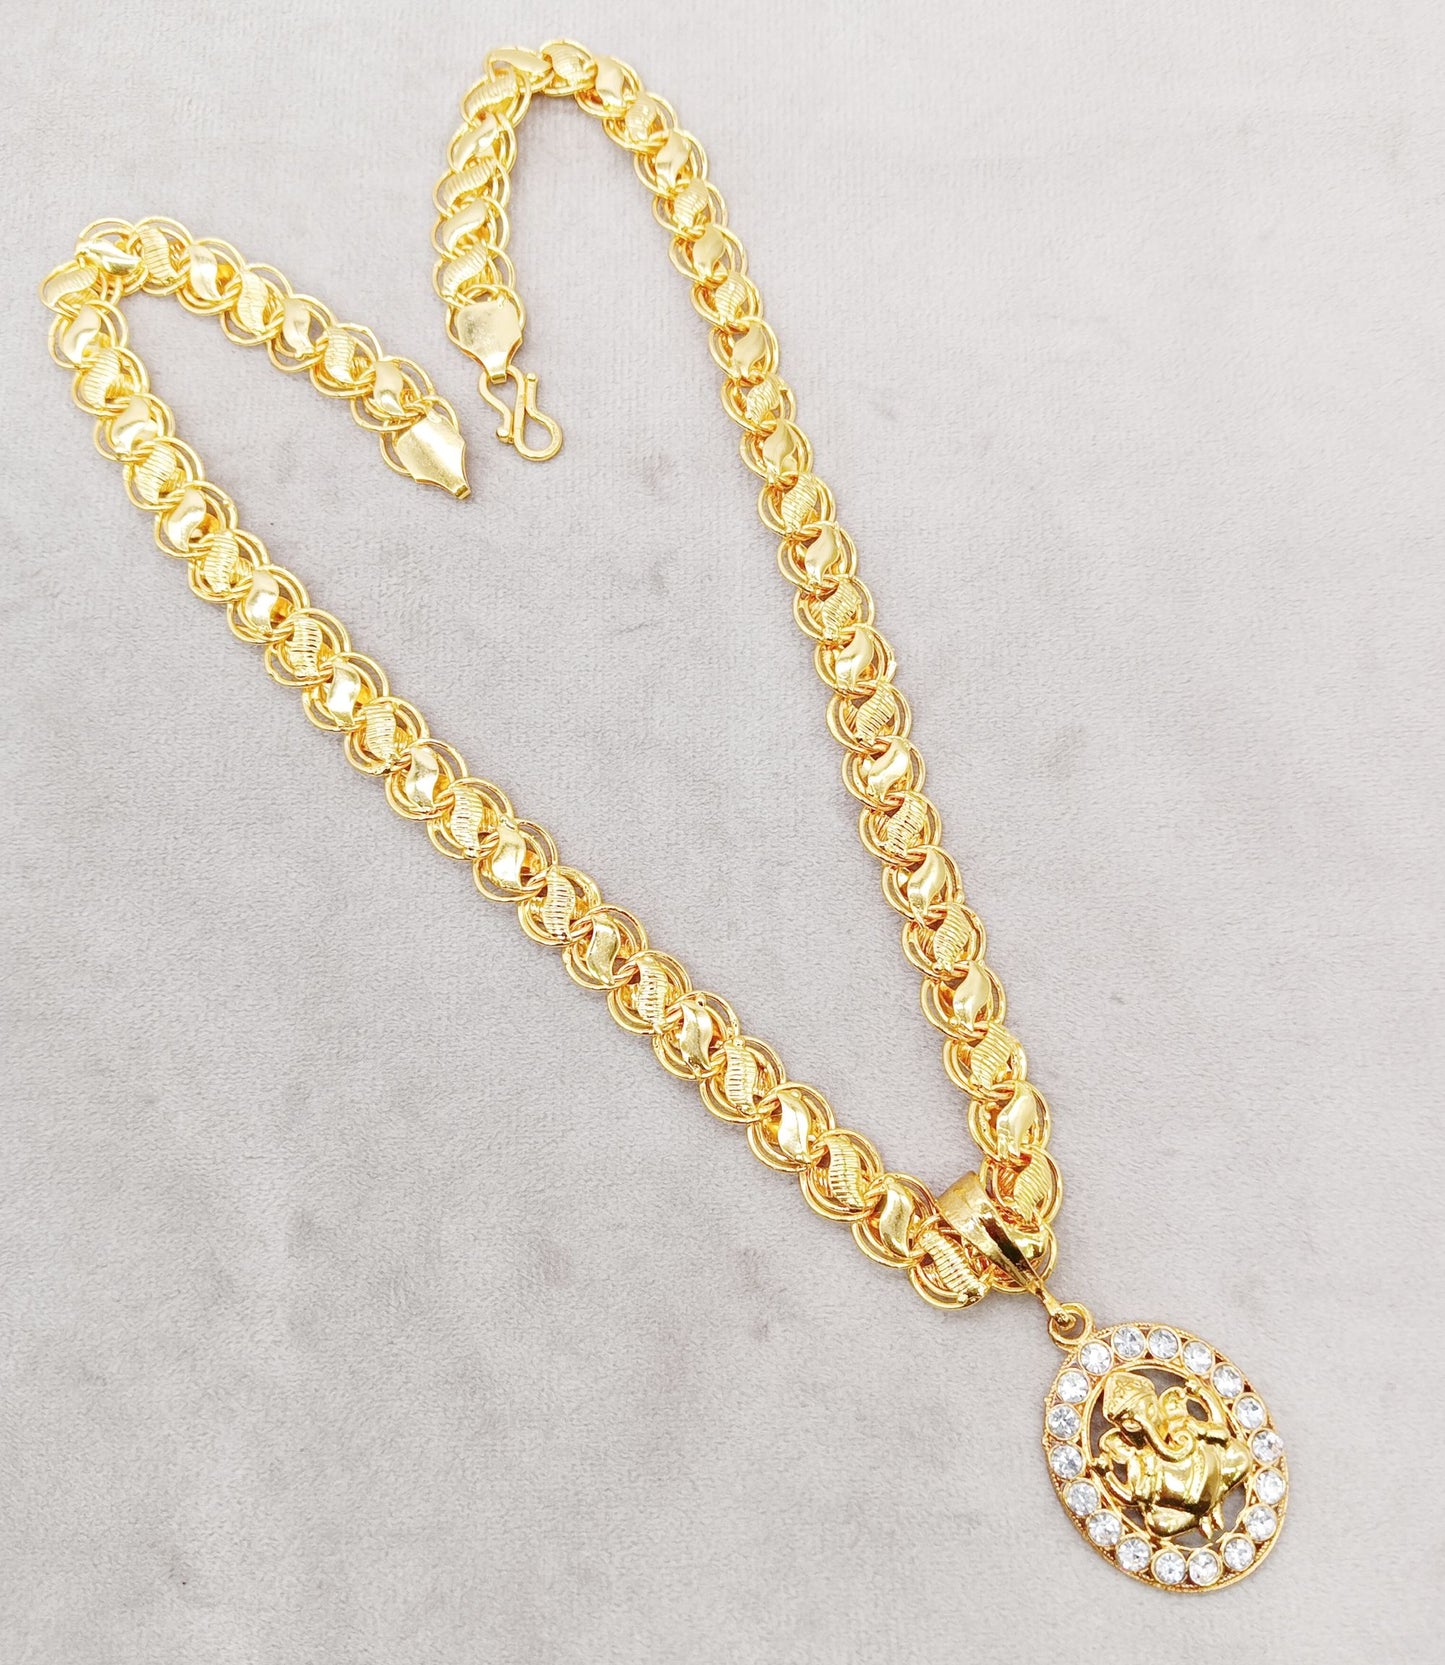 Luxurious Men's Gold Plated Pendant With Chain Vol 4